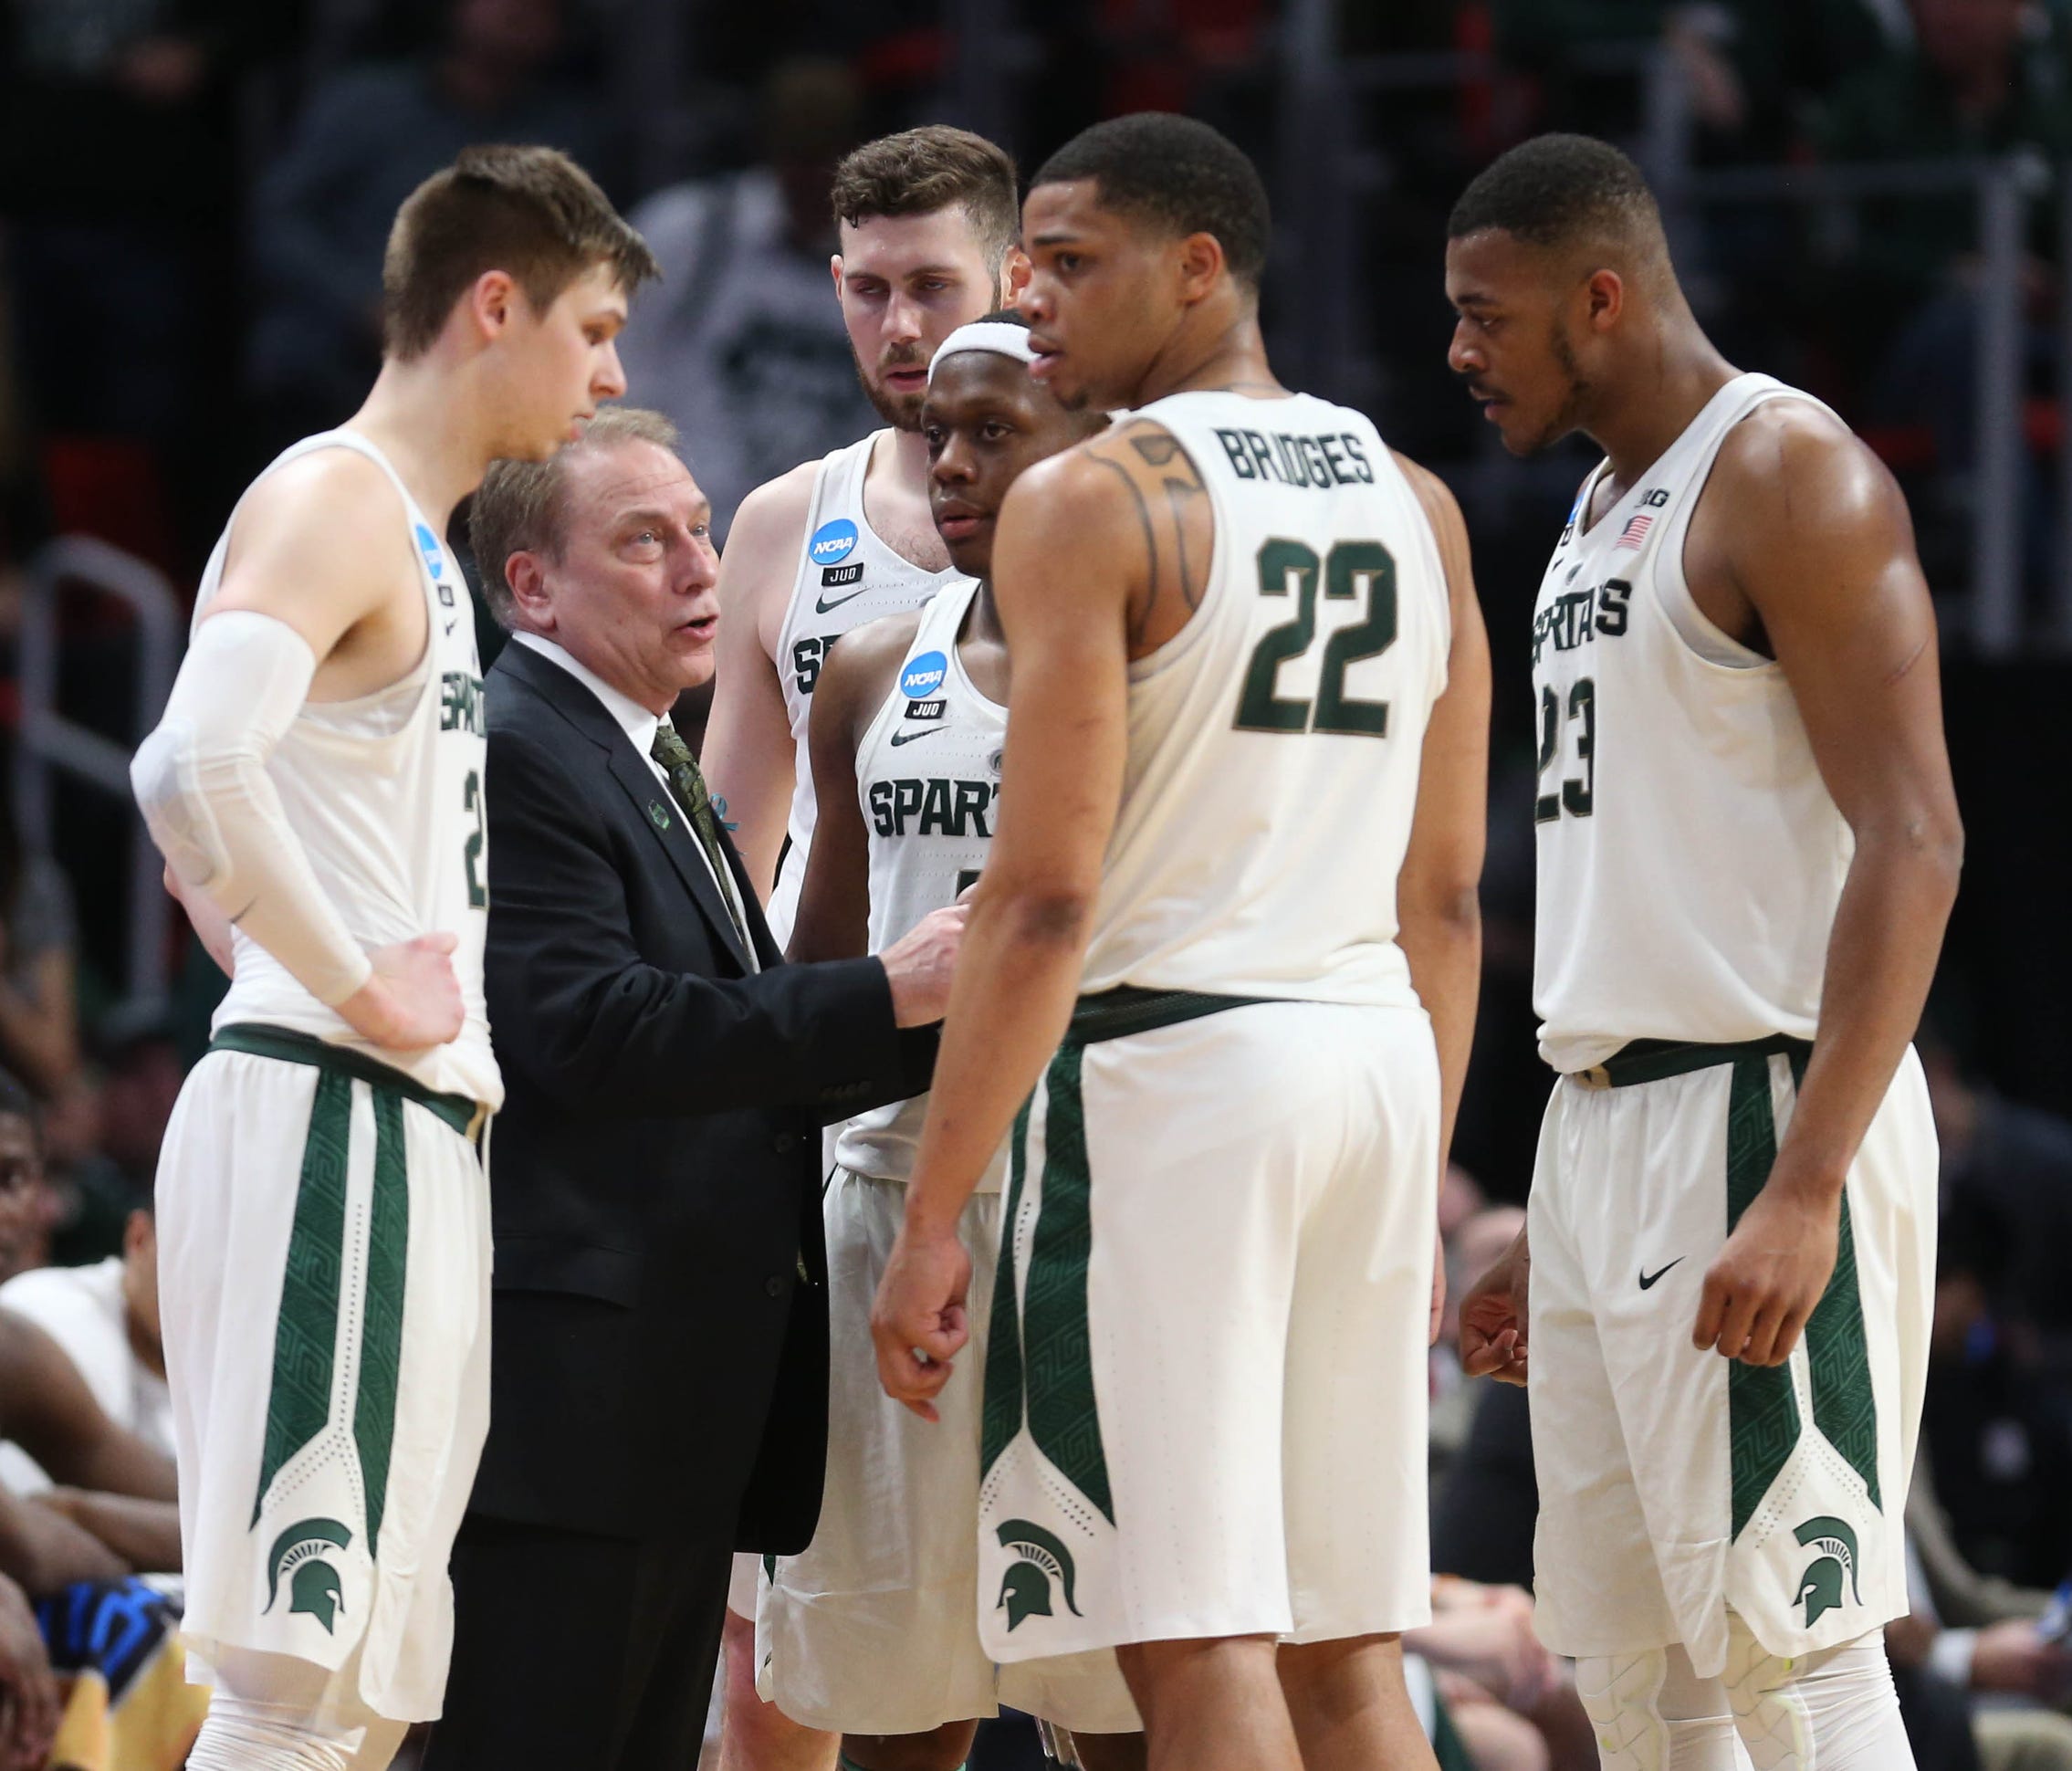 Michigan State coach Tom Izzo talks to his players during a timeout against Syracuse in the NCAA tournament Sunday, March 18, 2018 at Little Caesars Arena.